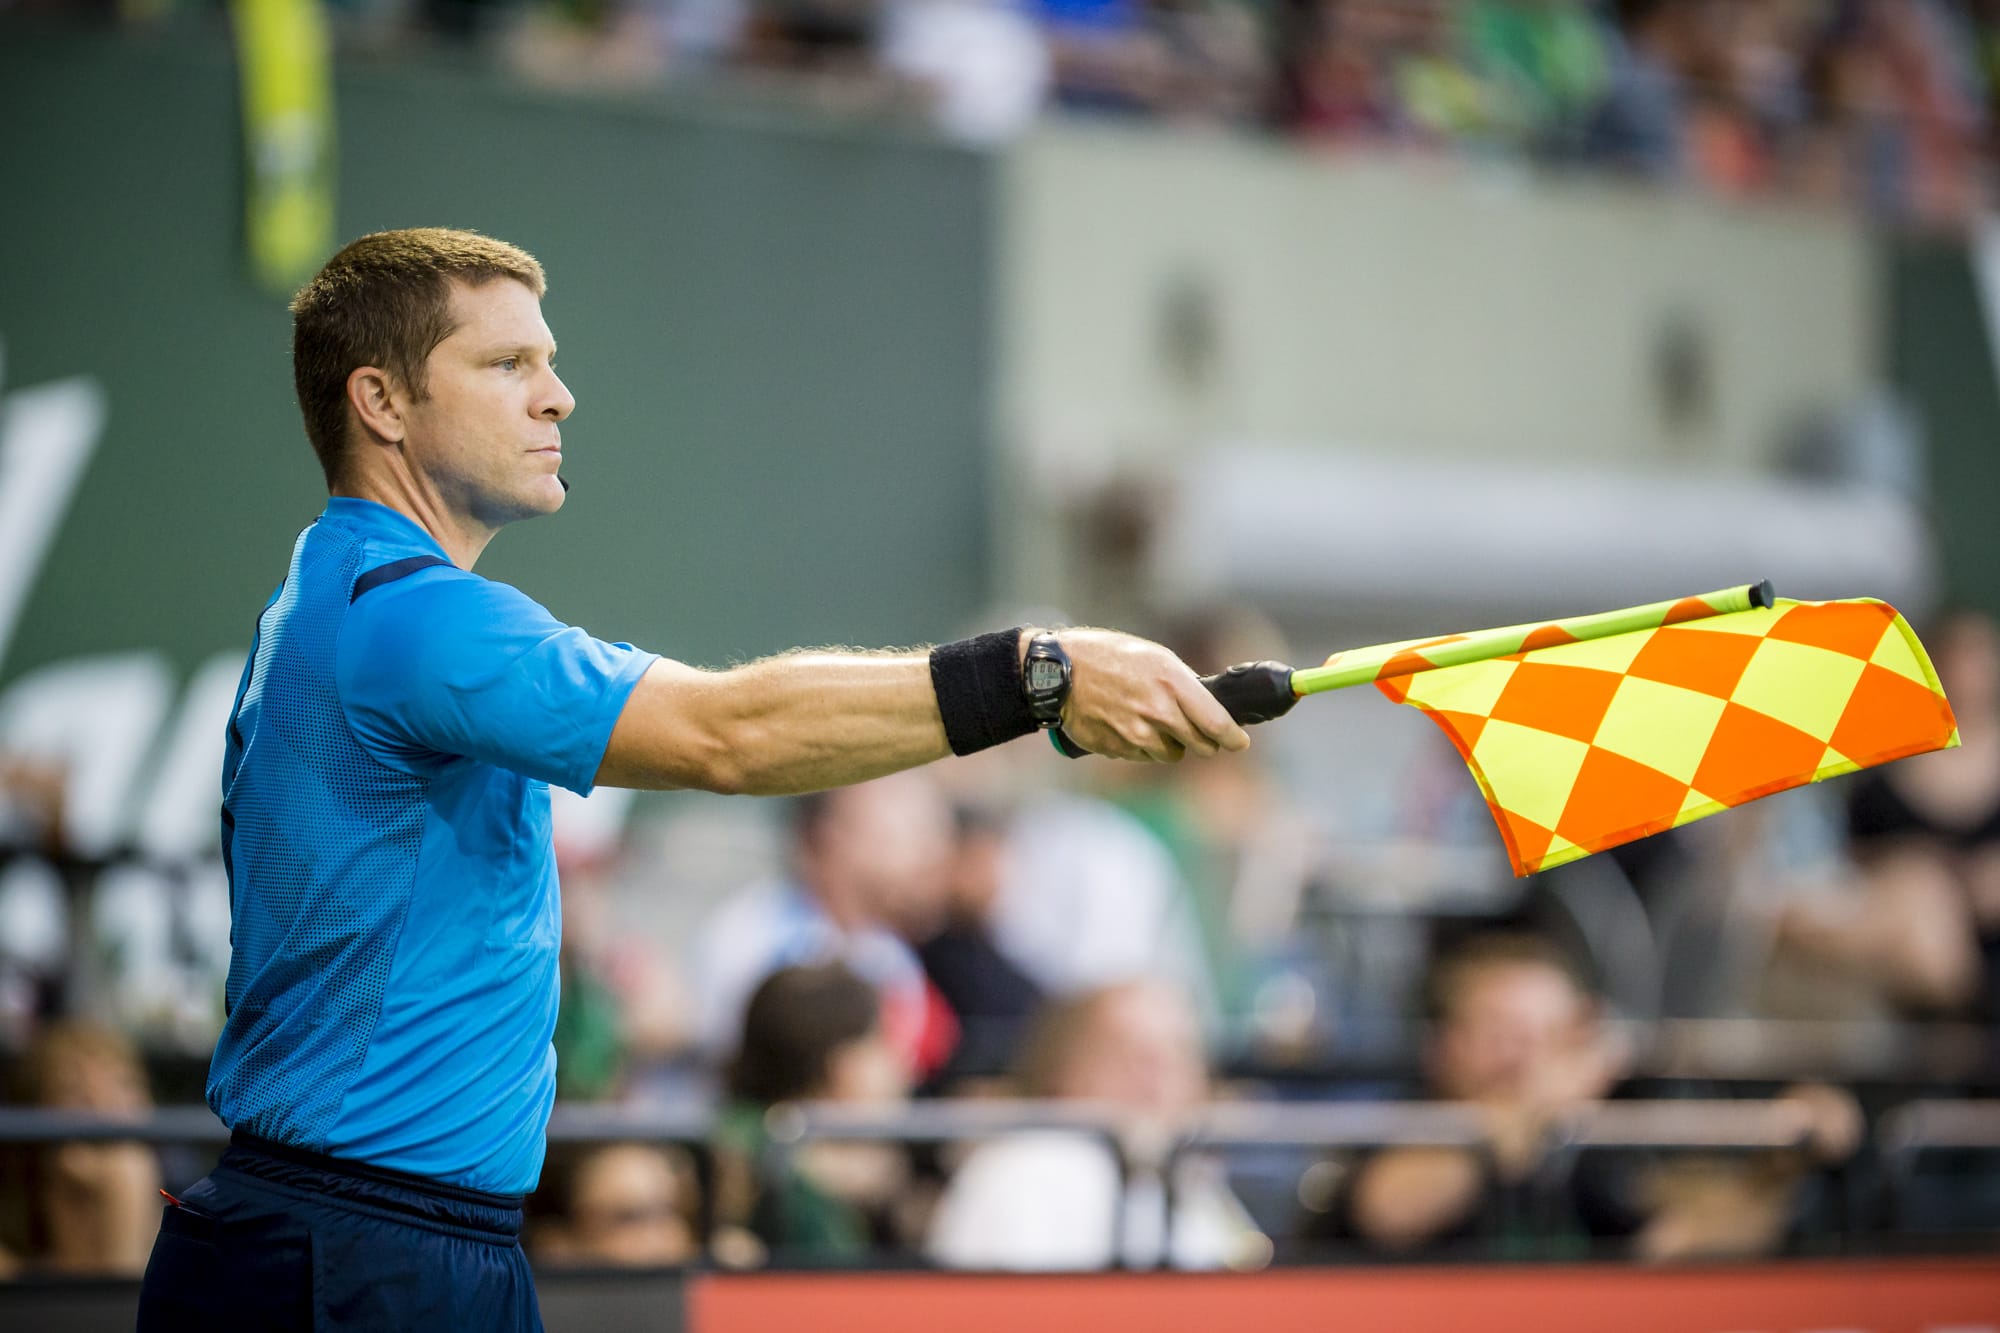 MLS Assistant Referee Jeremy Hanson of Vancouver works the sideline at the Portland Timbers' match against the Chicago Fire Friday Aug. 7th at Providence Park.